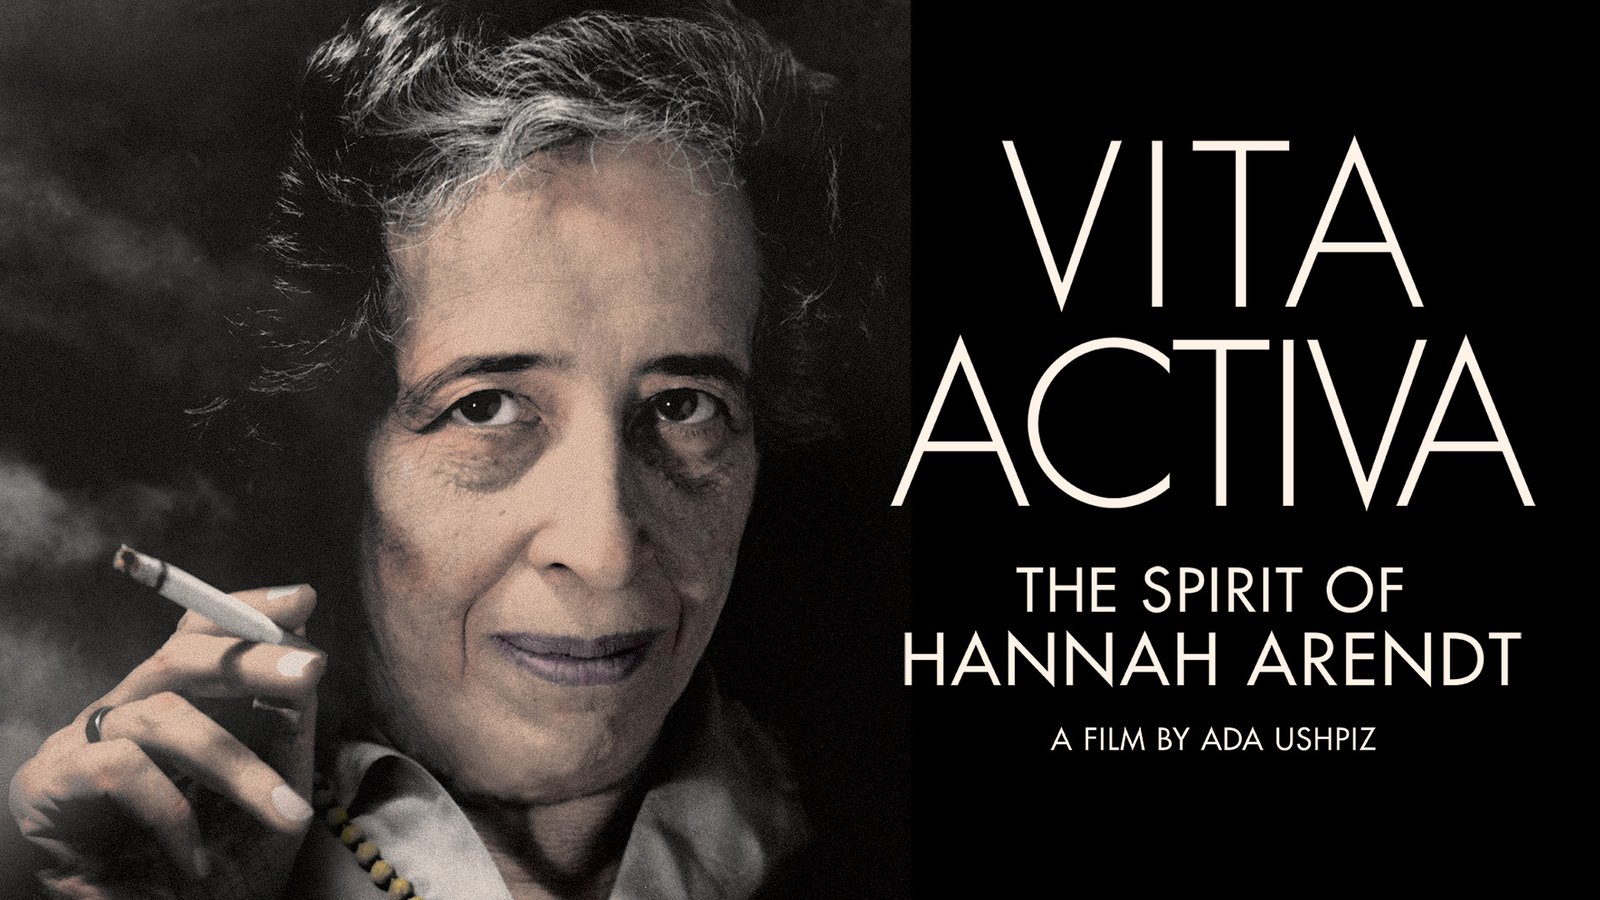 Vita Activa: The Spirit of Hannah Arendt - The Life and Work of A Moral Philosopher